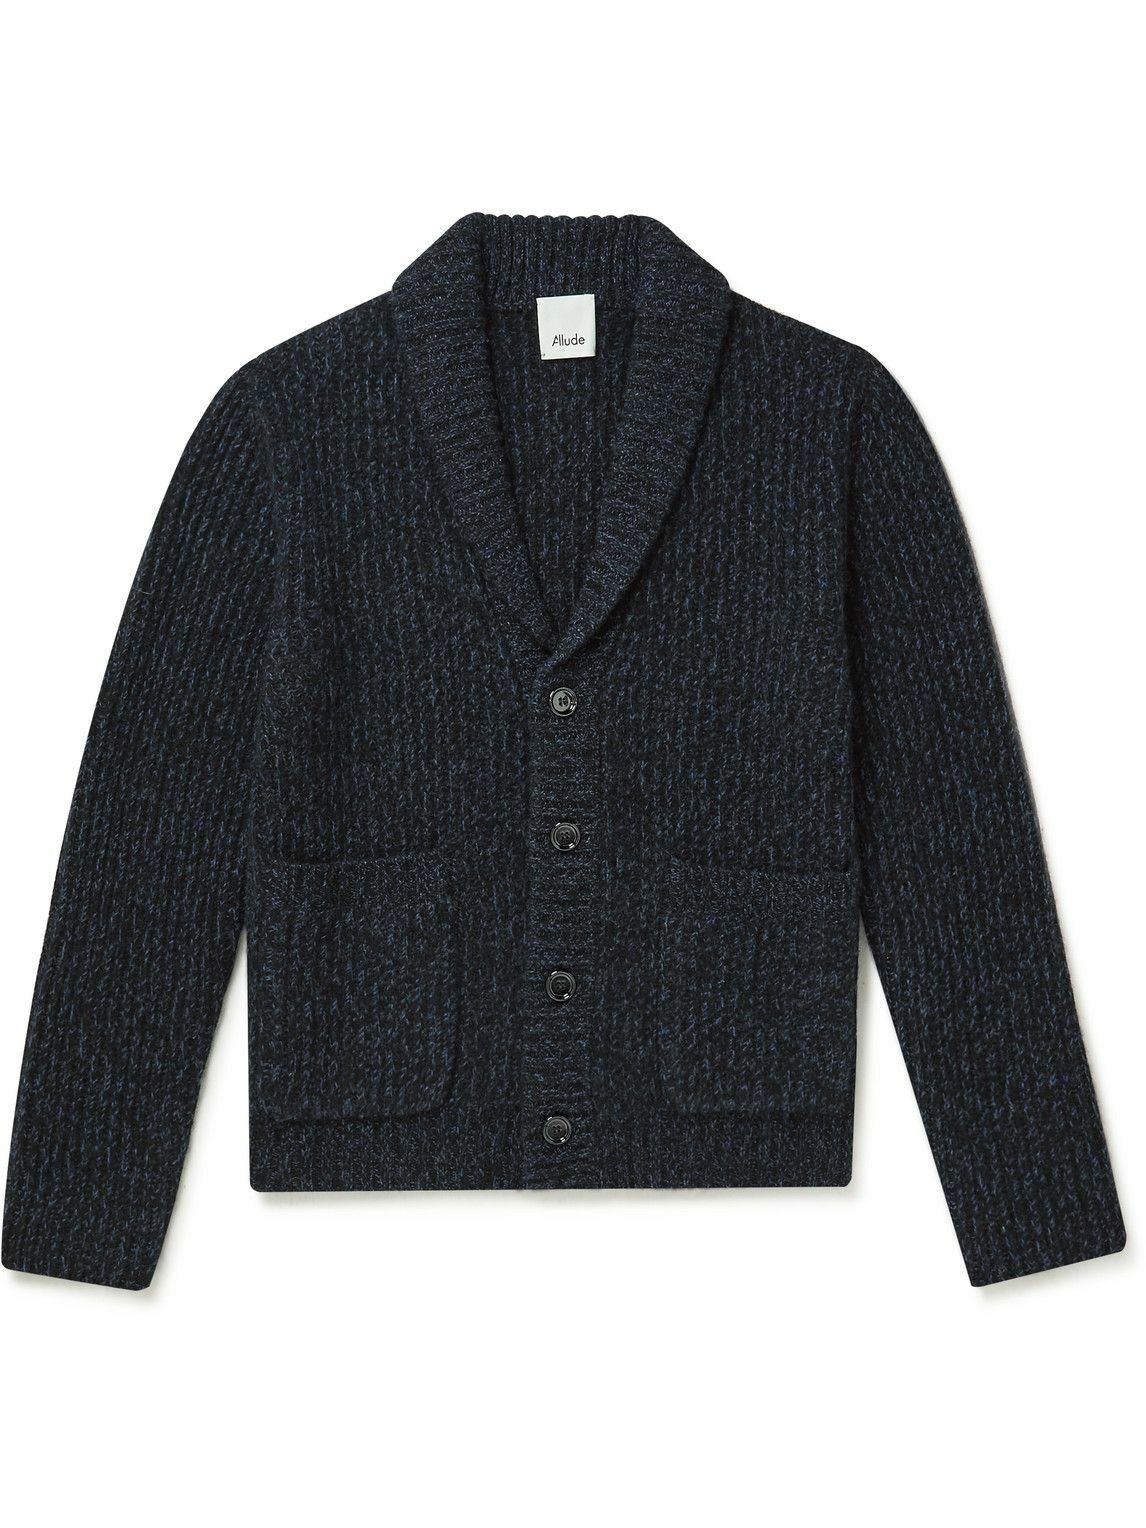 Photo: Allude - Shawl-Collar Ribbed Wool and Cashmere-Blend Cardigan - Blue